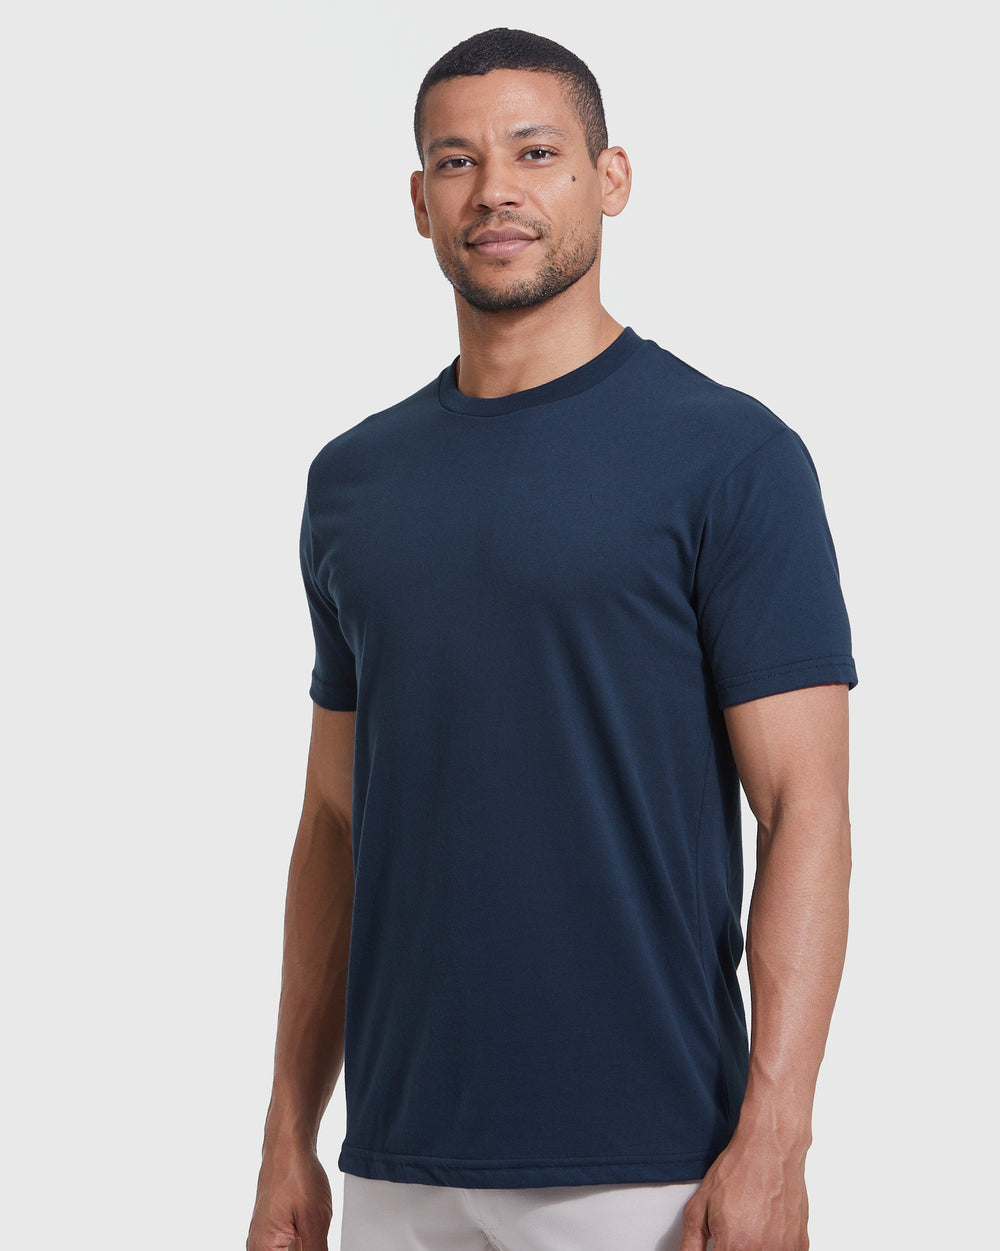 Navy & Carbon Classic Crew Neck 2-Pack